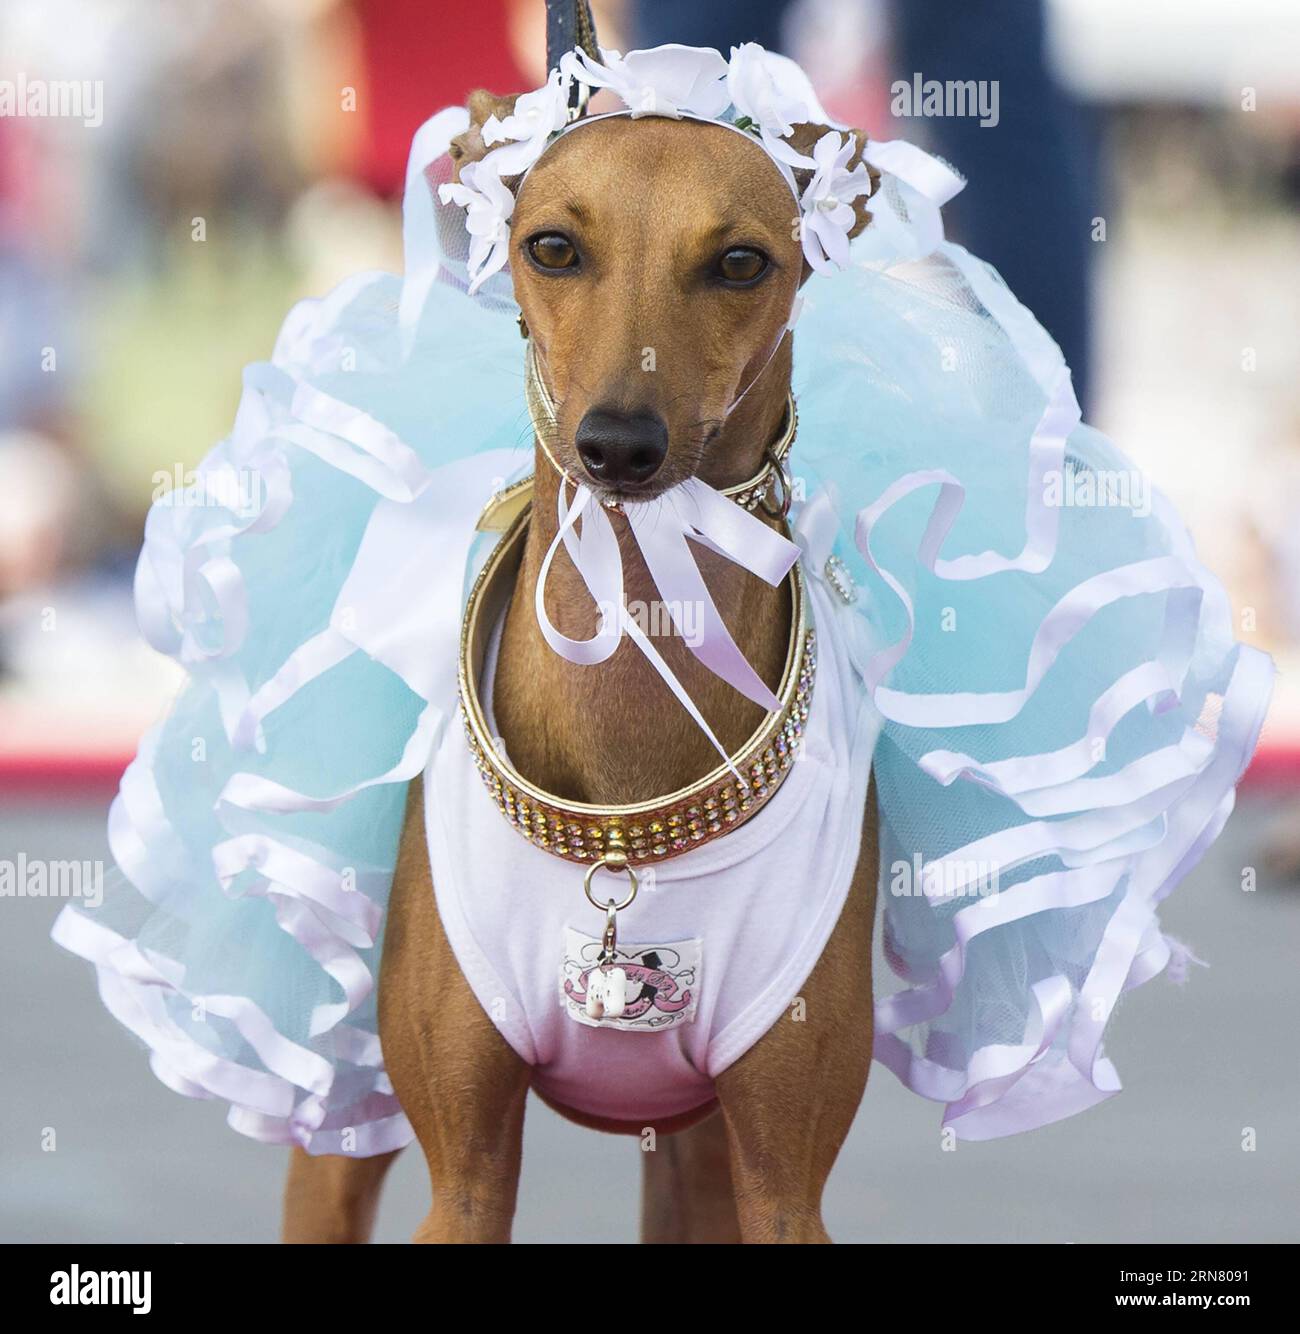 (150927) -- TORONTO, Sept. 27, 2015 -- A dressed up pet dog is seen on stage during the fashion show event of the 2015 Woofstock at Woodbine Park in Toronto, Canada, Sept. 27, 2015. Woofstock is the largest outdoor festival for dogs in North America. ) CANADA-TORONTO-WOOFSTOCK-PET DOG-FASHION SHOW ZouxZheng PUBLICATIONxNOTxINxCHN   Toronto Sept 27 2015 a Dressed up Pet Dog IS Lakes ON Stage during The Fashion Show Event of The 2015 Woofstock AT Woodbine Park in Toronto Canada Sept 27 2015 Woofstock IS The Largest Outdoor Festival for Dogs in North America Canada Toronto Woofstock Pet Dog Fashi Stock Photo